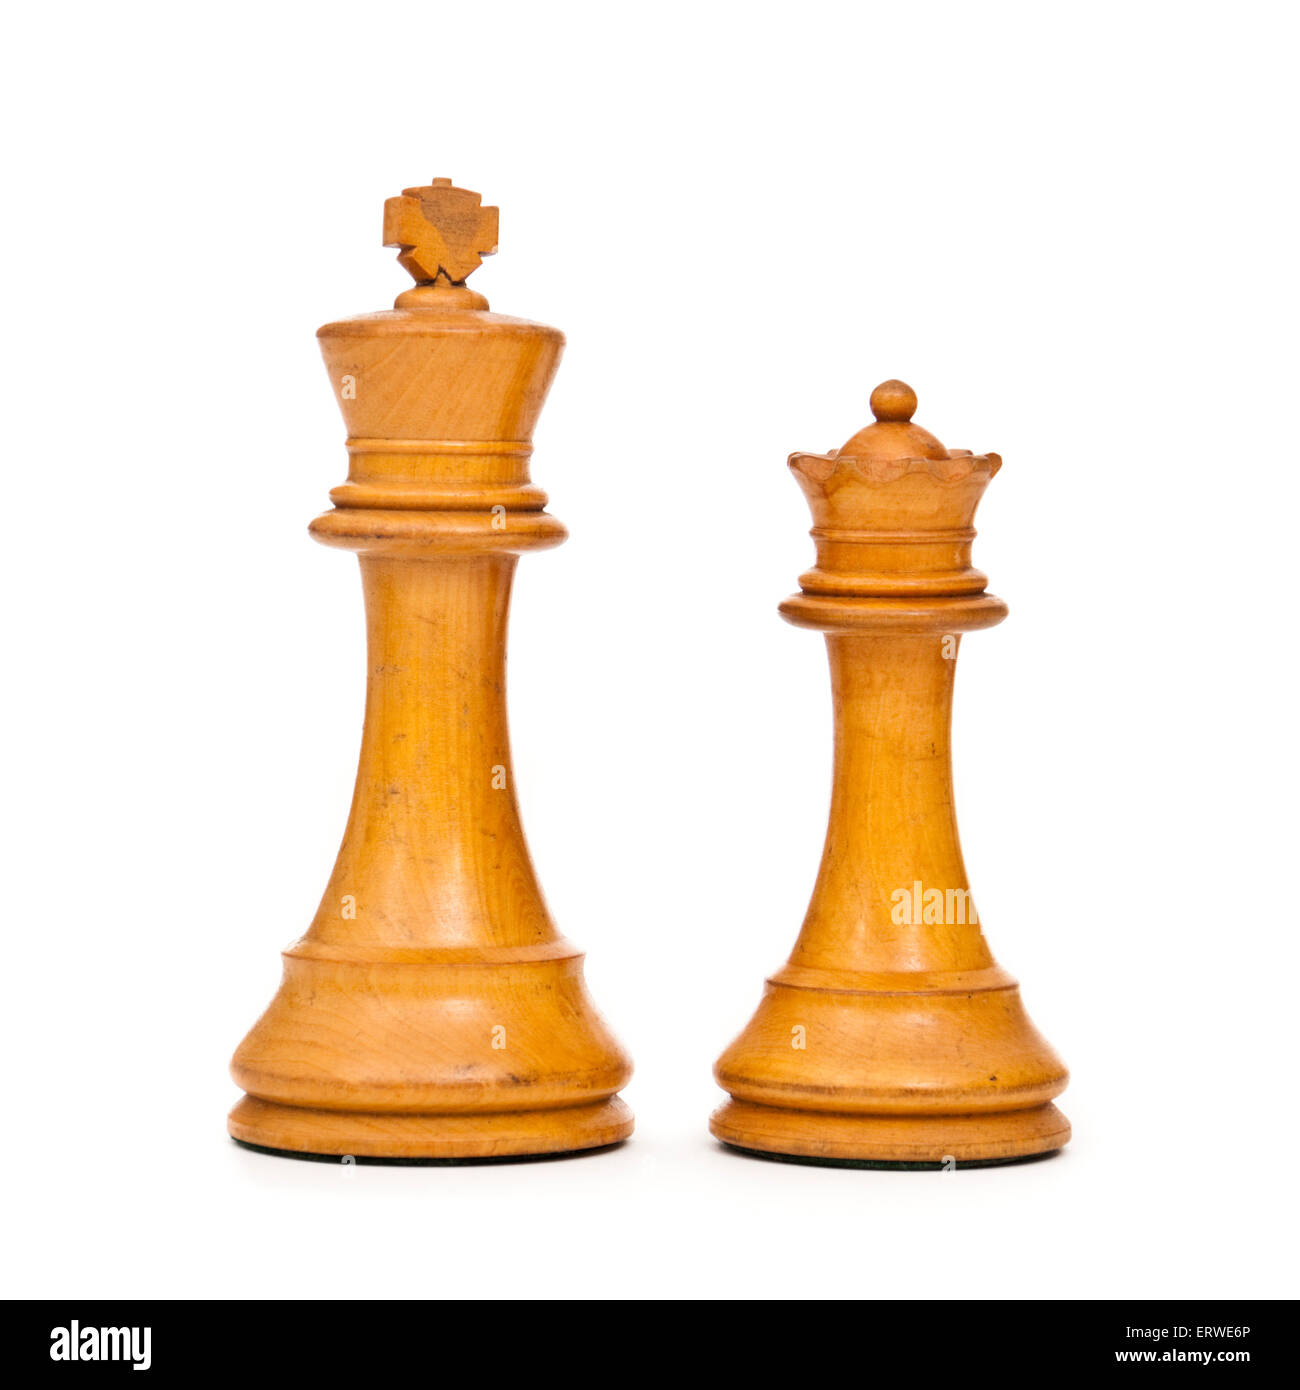 Vintage wooden chess pieces (King and Queen) Stock Photo